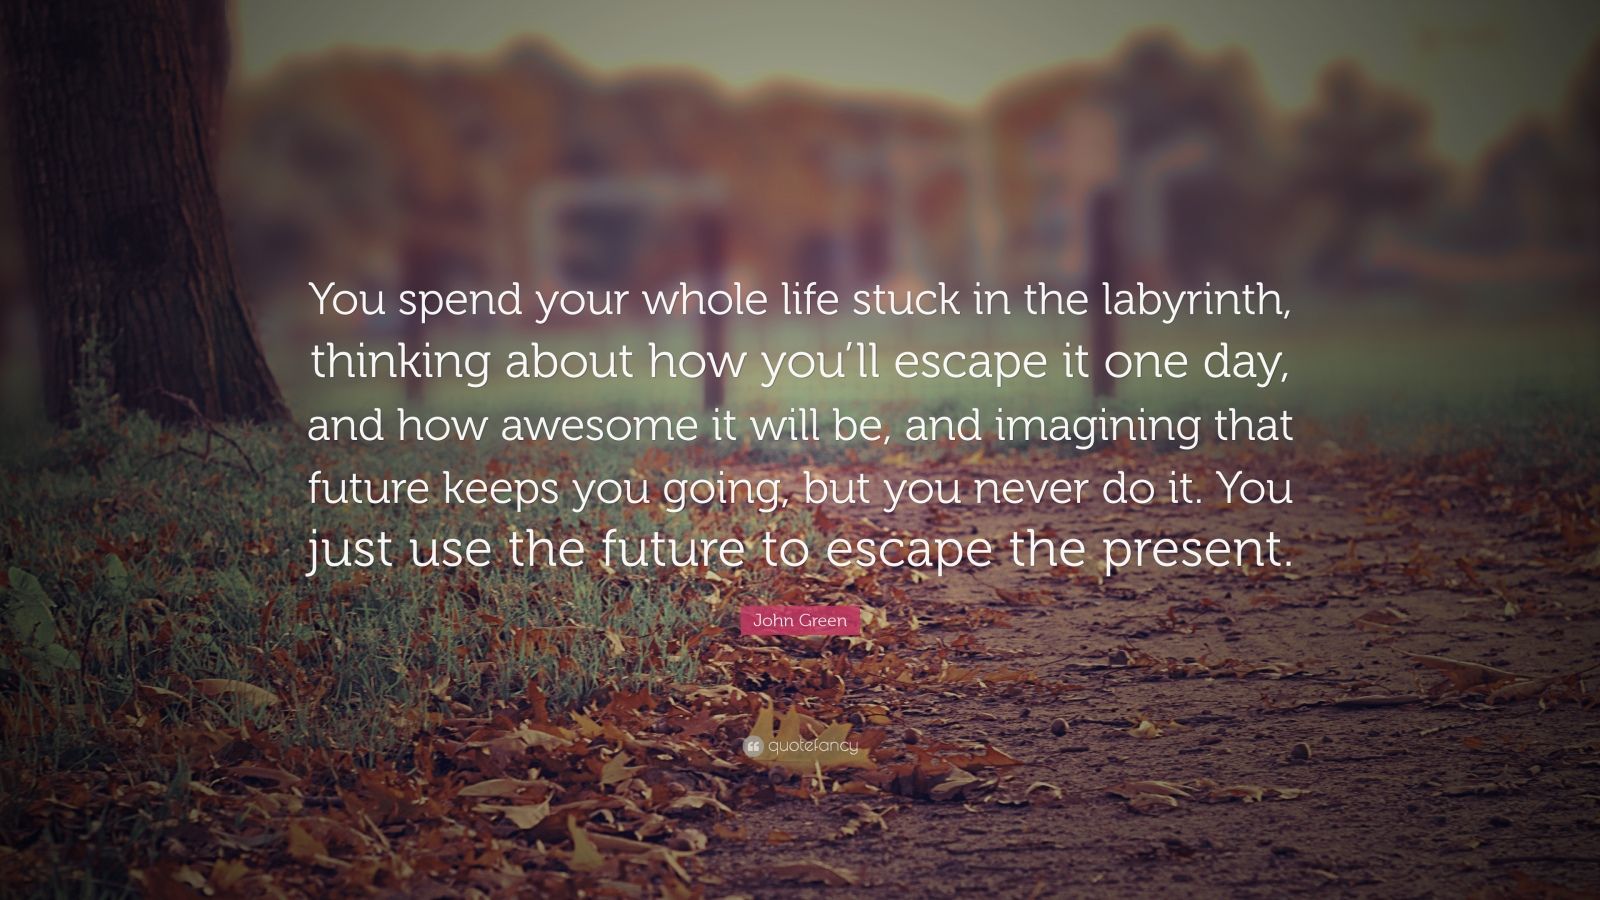 Motivational Quotes “You spend your whole life stuck in the labyrinth thinking about